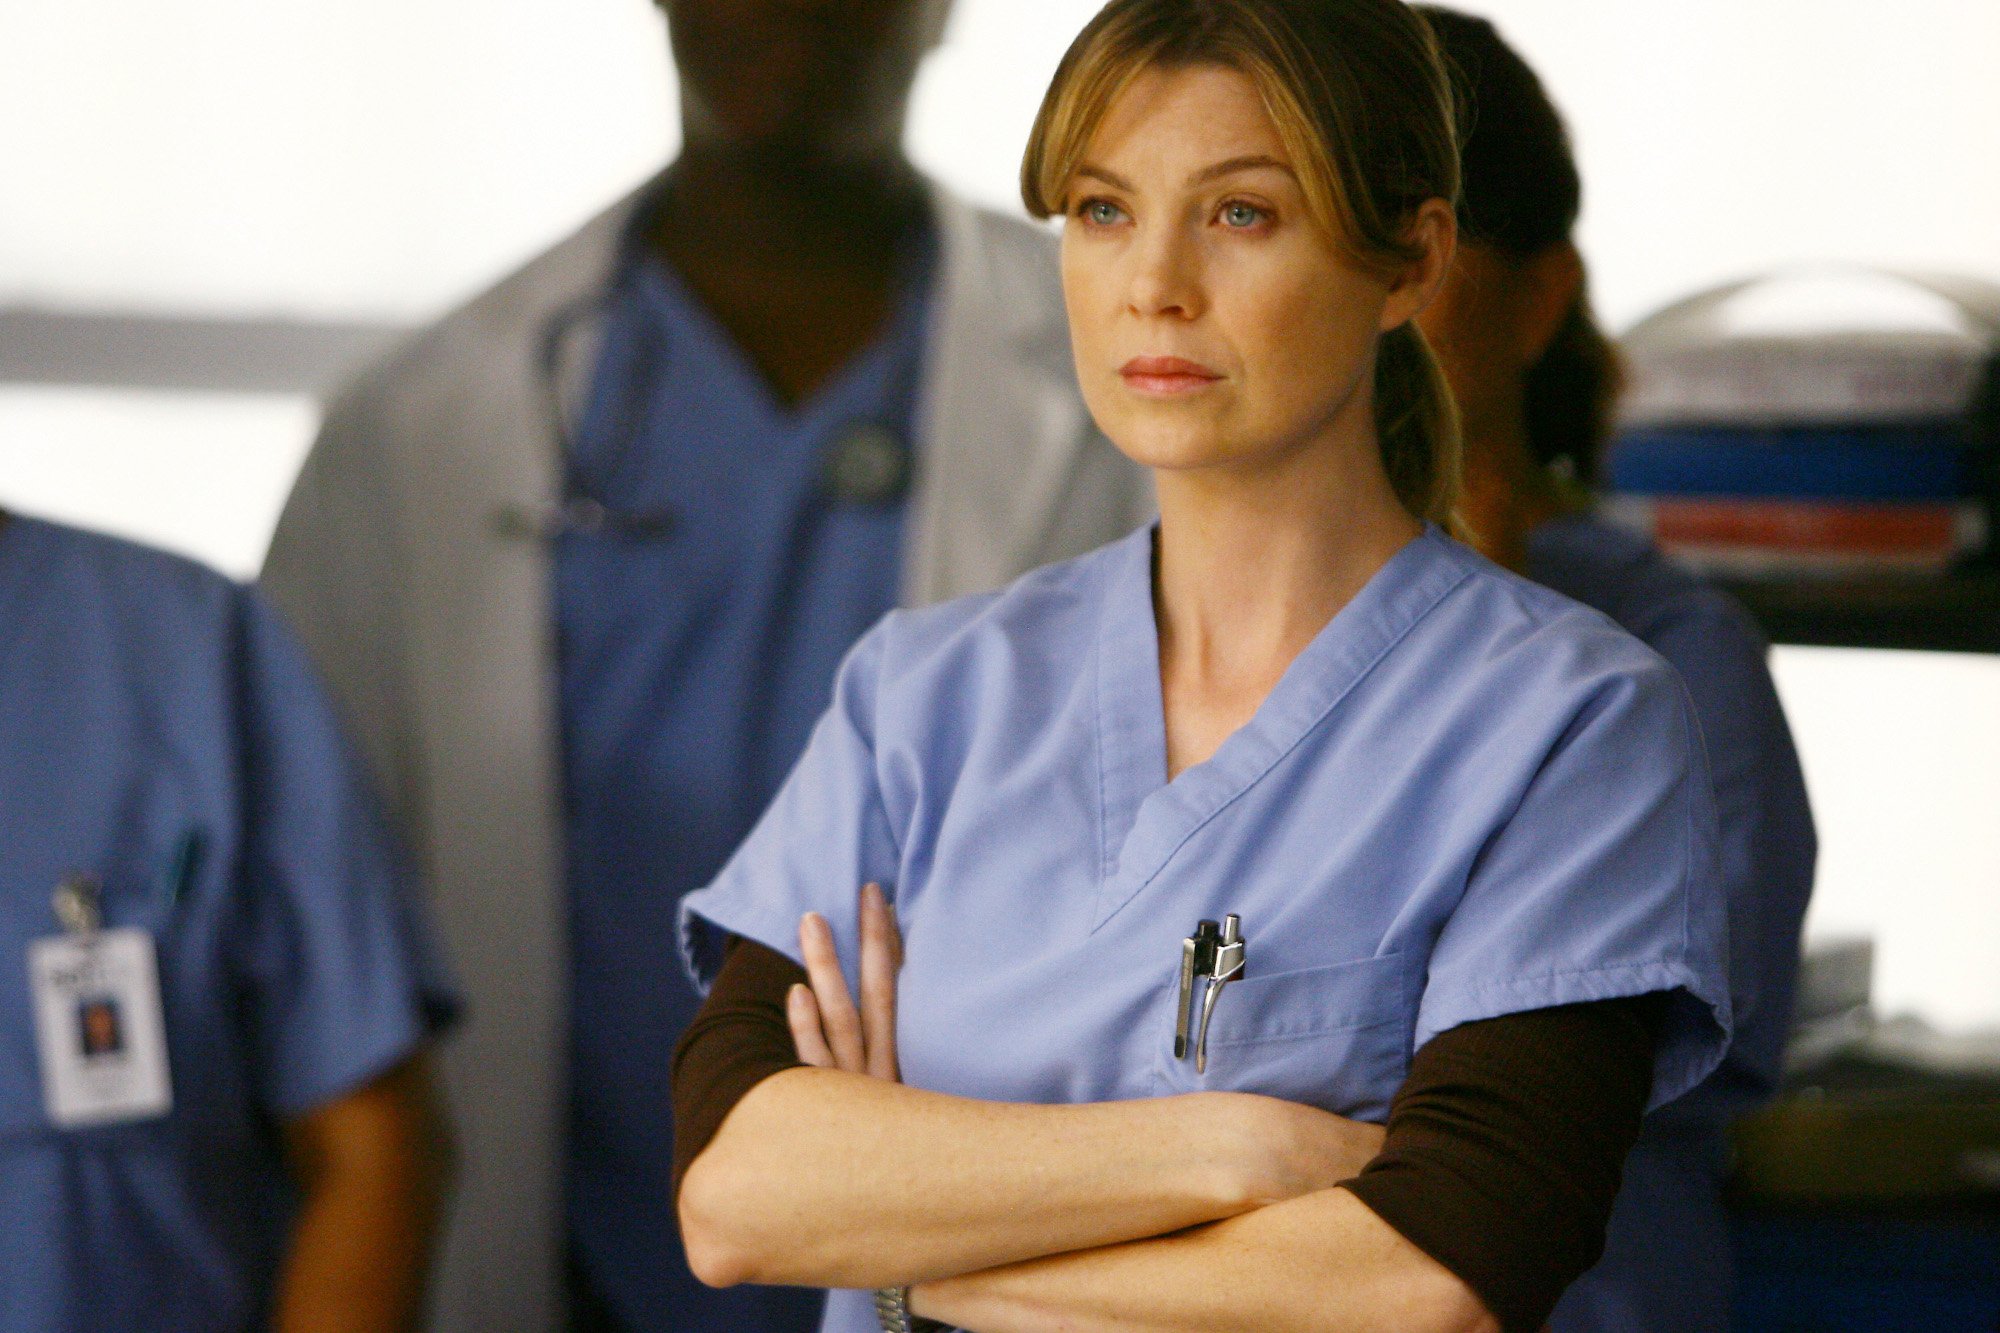 Ellen Pompeo as Meredith Grey in ABC's 'Grey's Anatomy.' She's wearing blue scrubs and her arms are crossed.